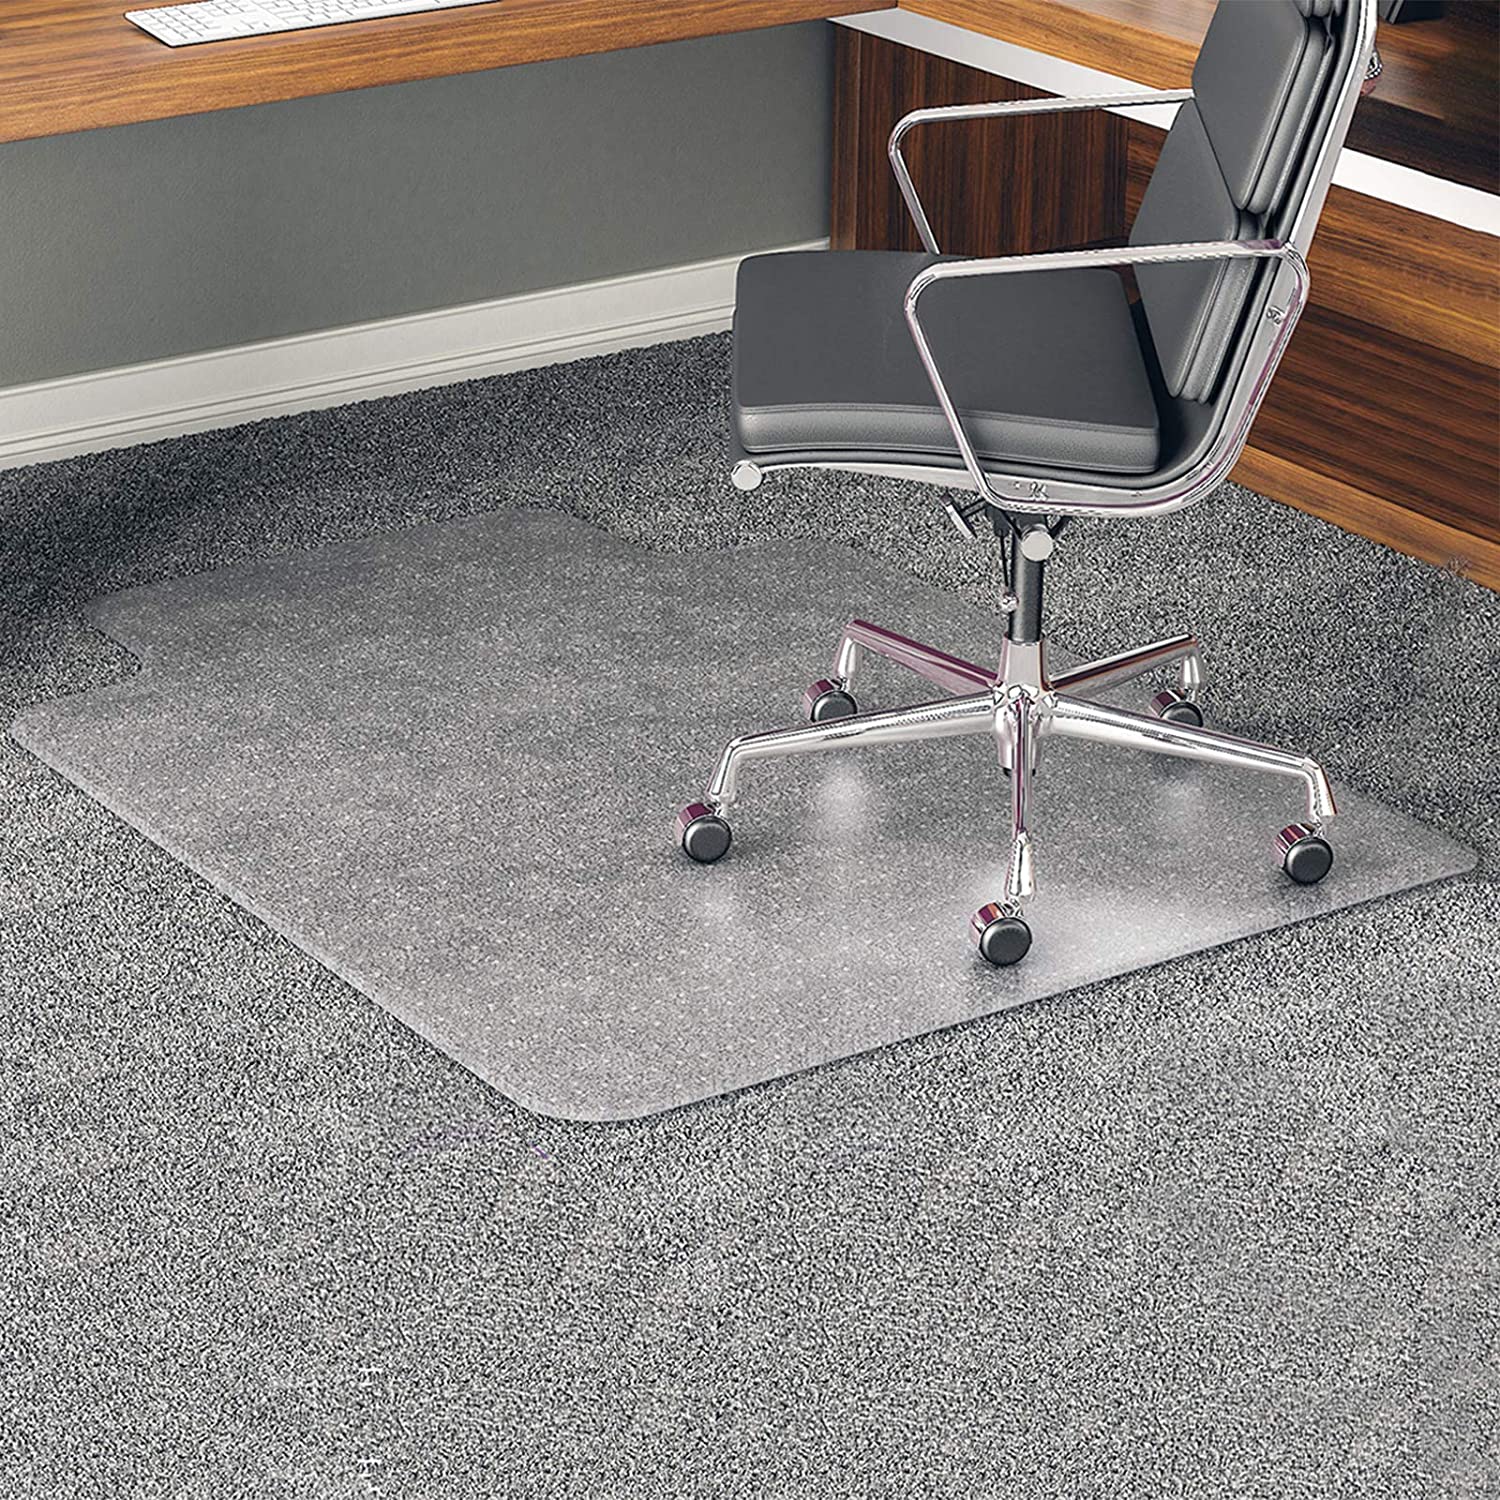 15 Best Chair Mats For Carpets 2021: Protect Floors From Mess, Buy These Mats At An Affordable Price Tag